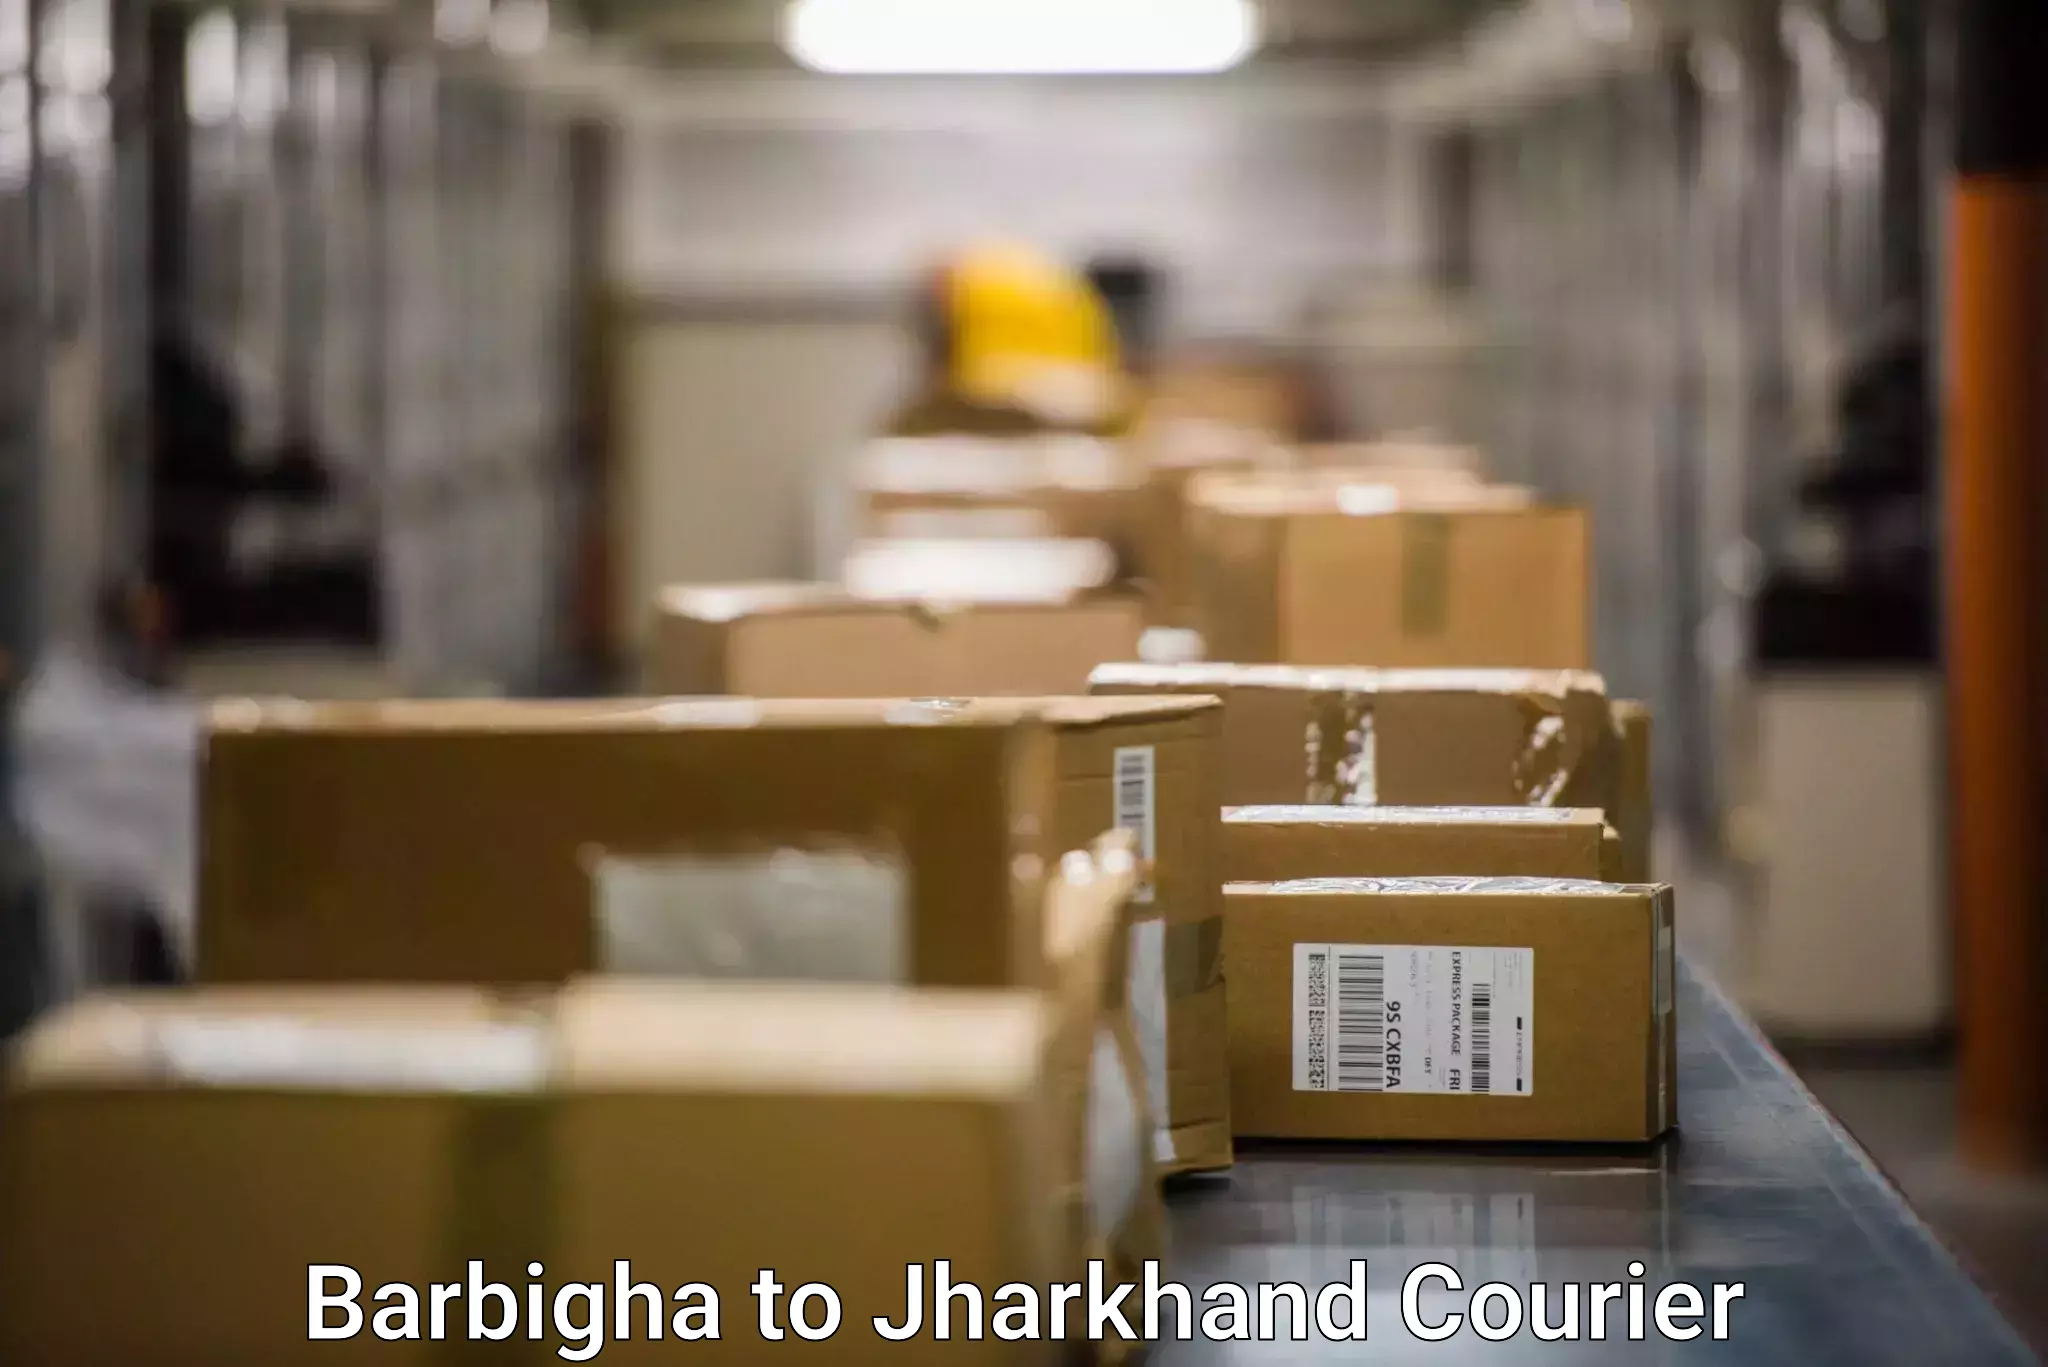 Rapid shipping services Barbigha to Kedla